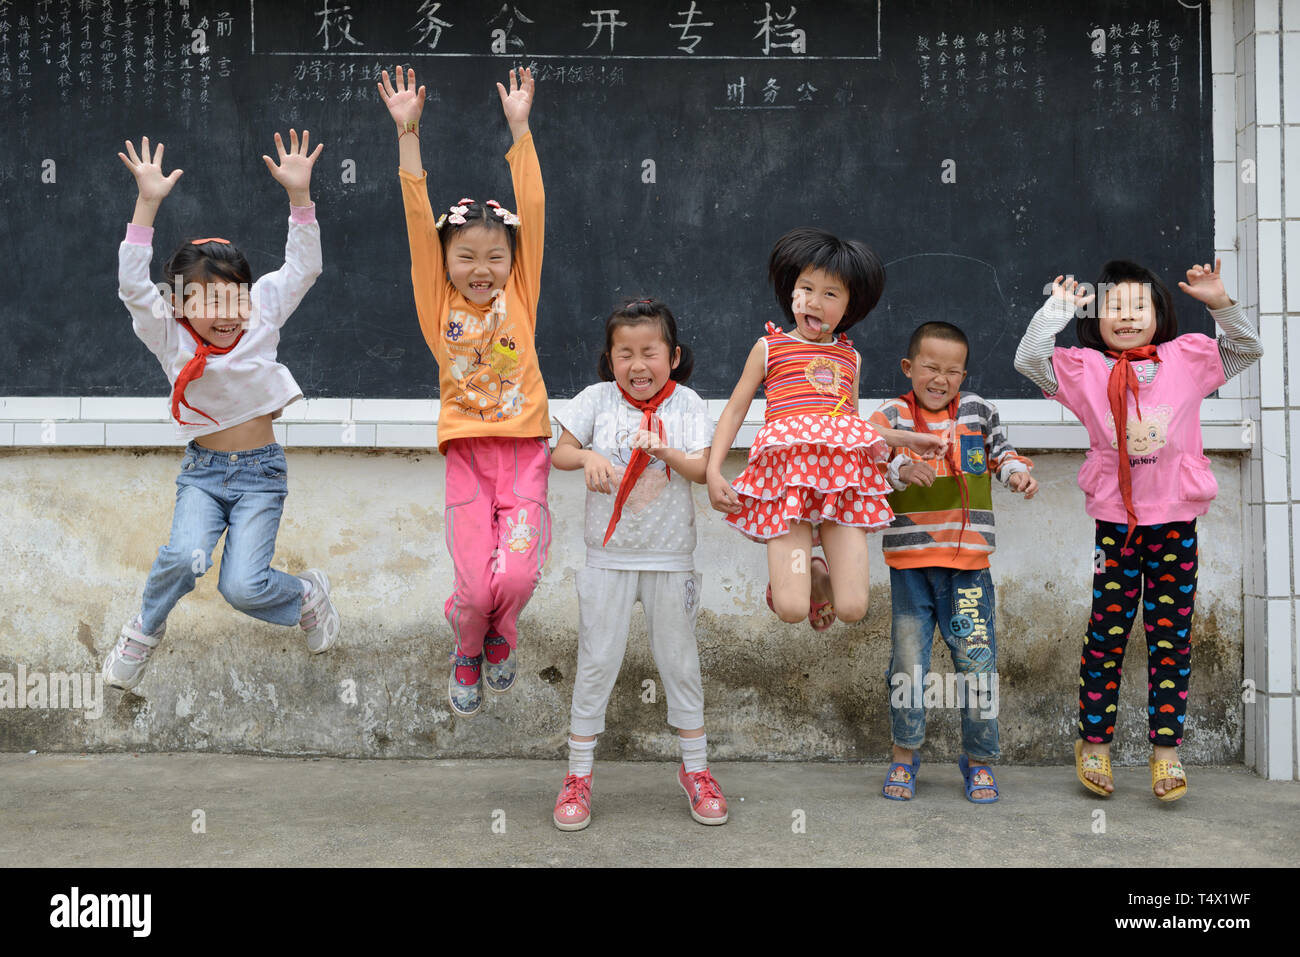 Primary age school children jumping and laughing in the school playground in rural Guangxi region, central southern China. Stock Photo